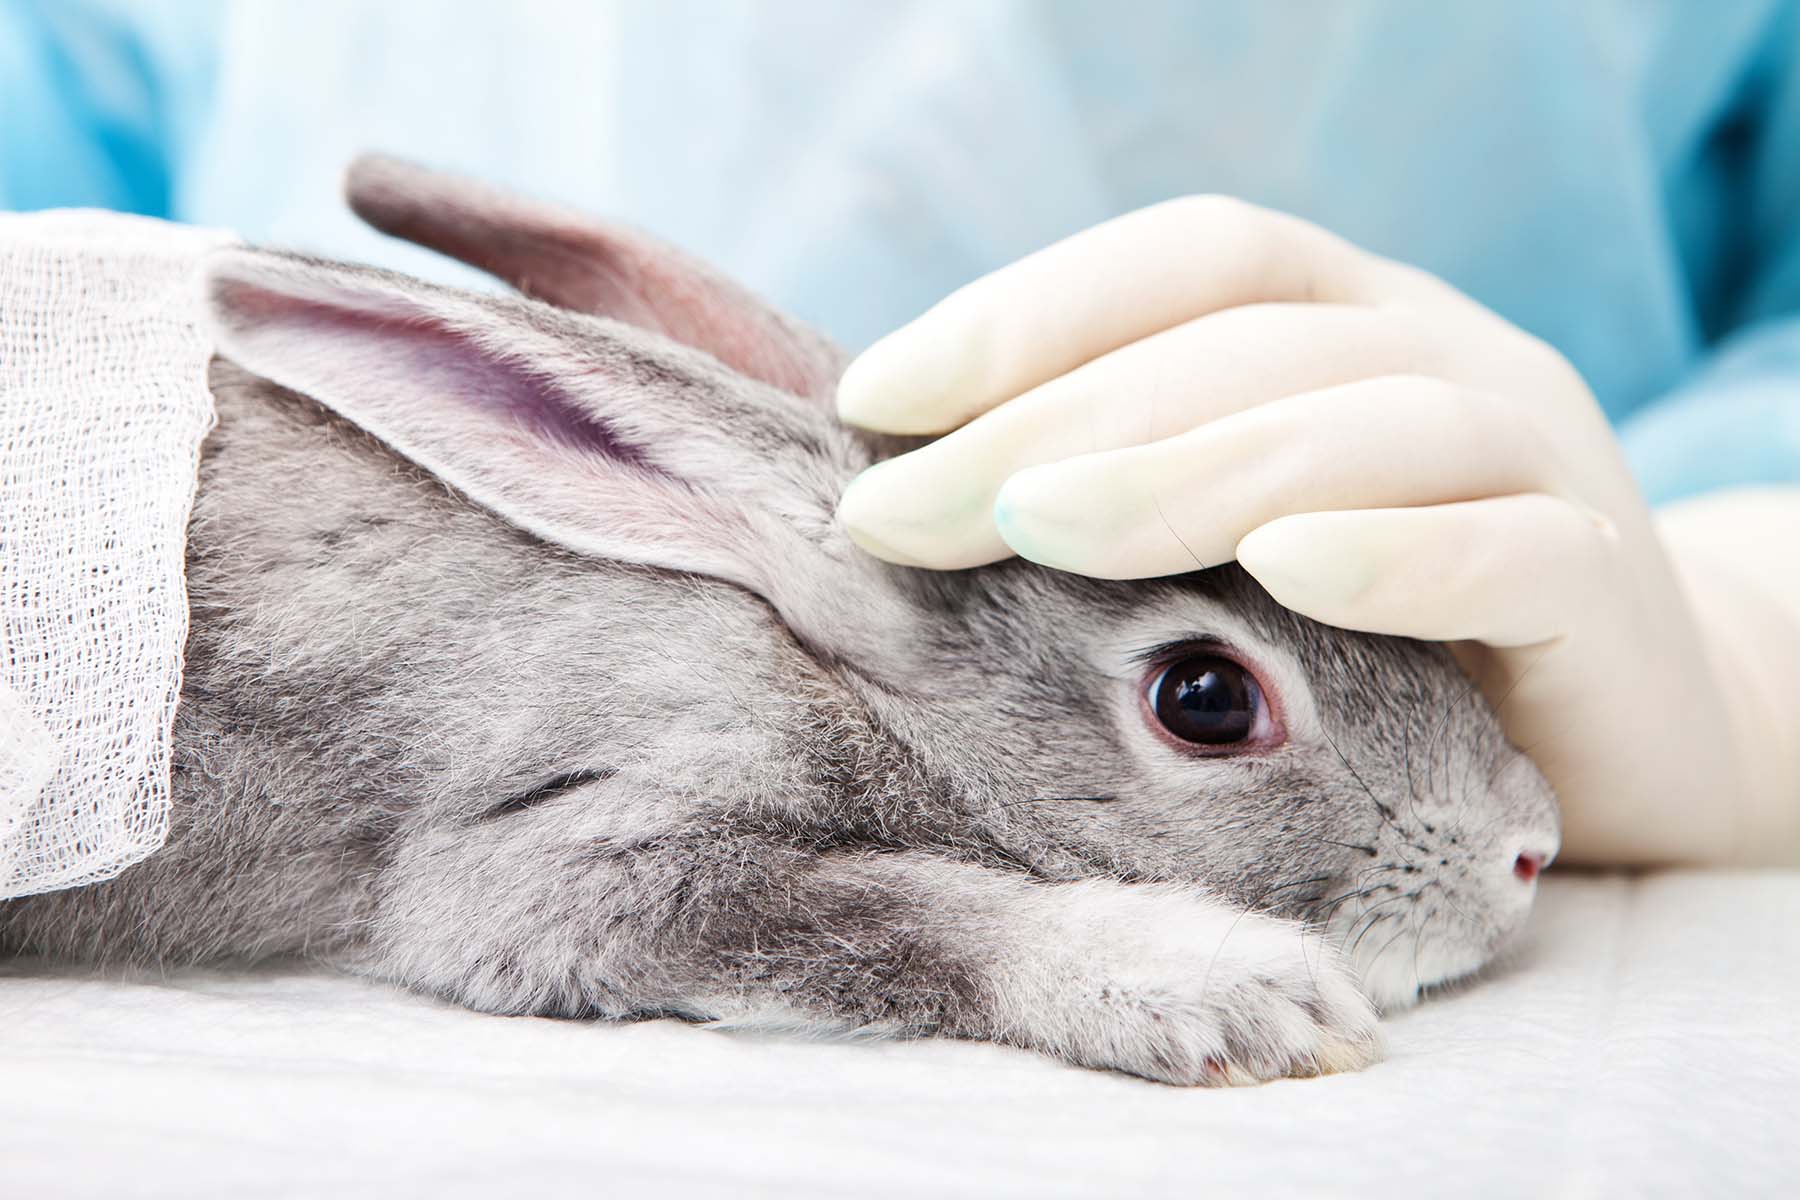 A closeup photo of a rabbit about to have surgery with a gloved hand on their head.